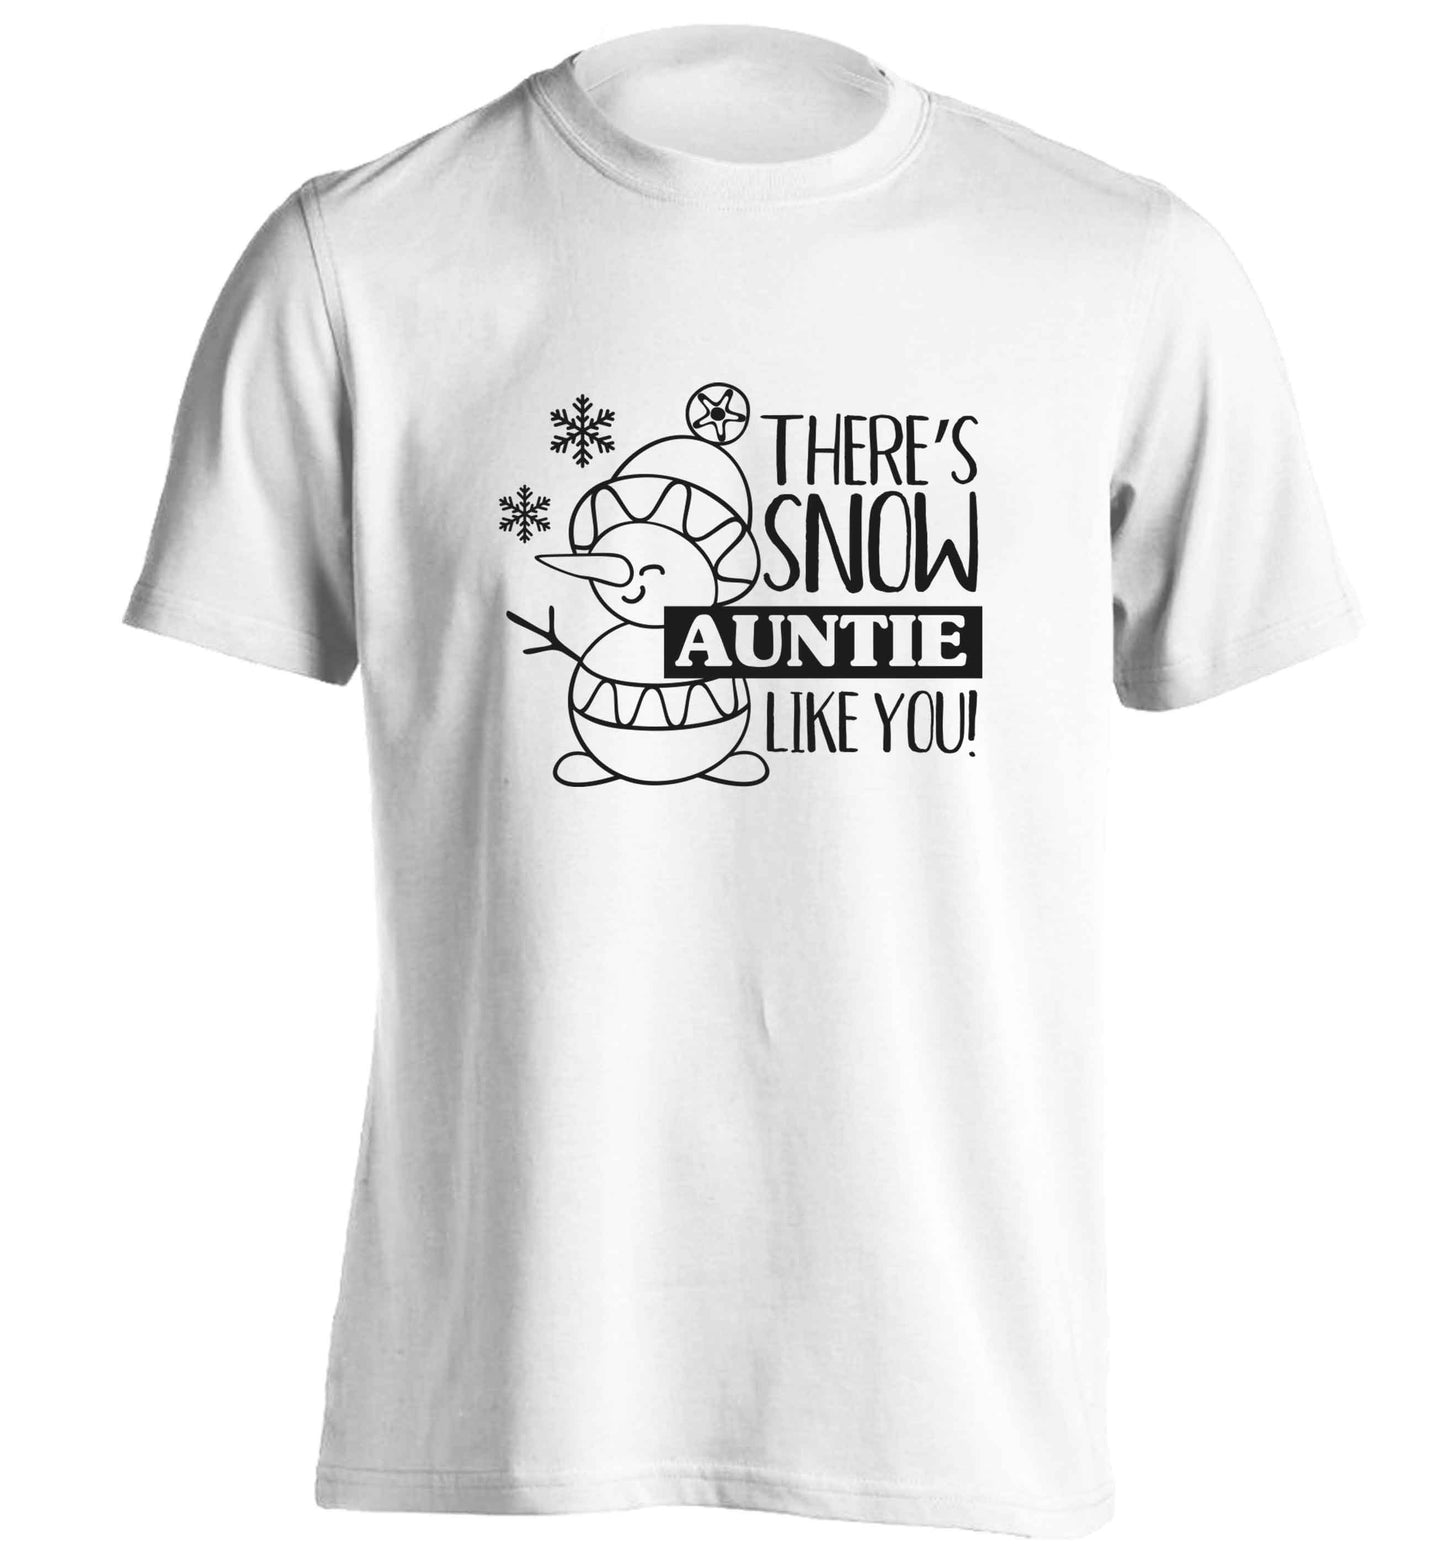 There's snow auntie like you adults unisex white Tshirt 2XL